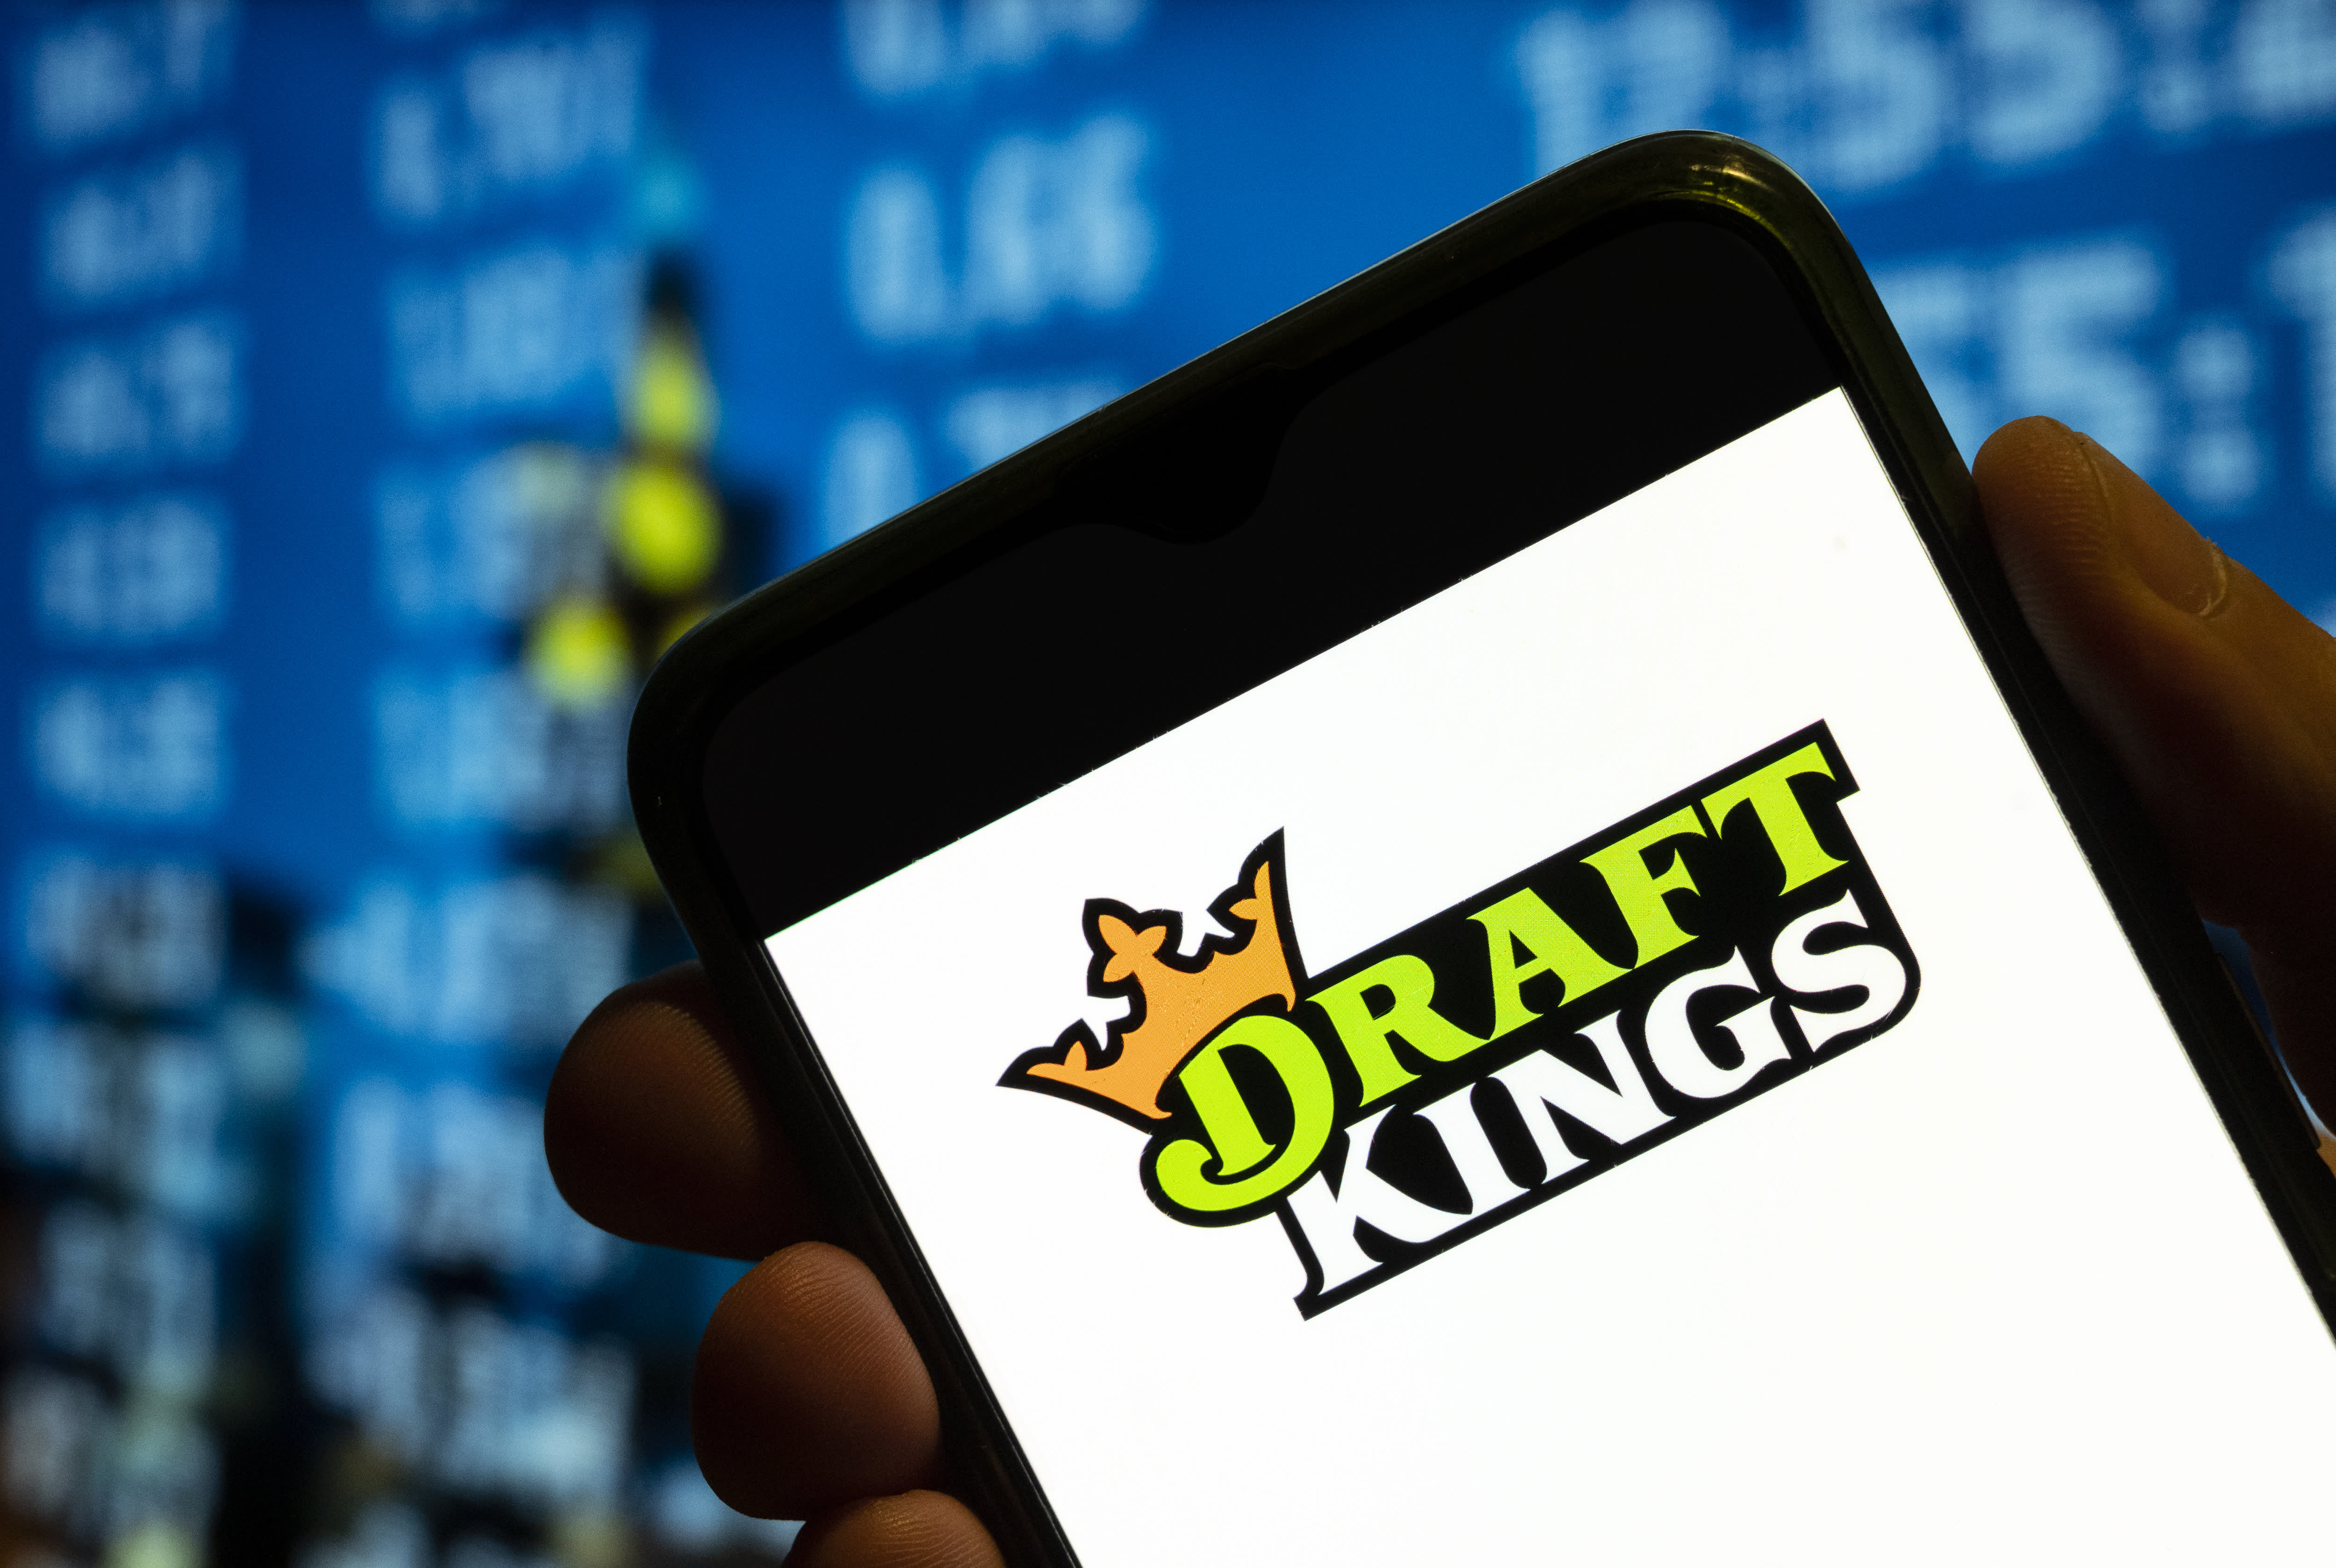 What Are Crowns In Draftkings